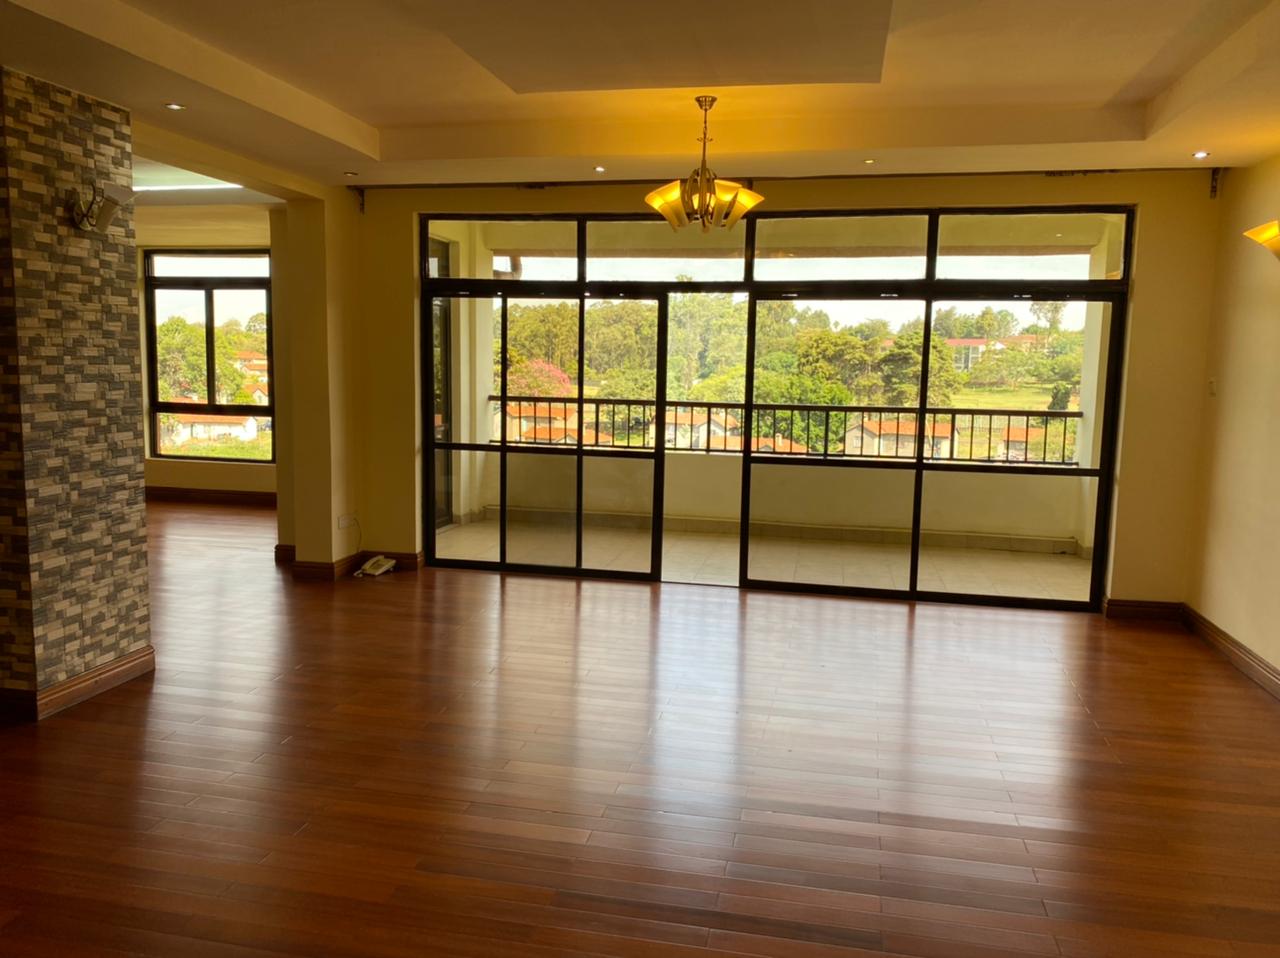 4 Bedroom All Ensuite Apartment for Rent in Kilimani at Ksh200k with exciting amenities  (18)